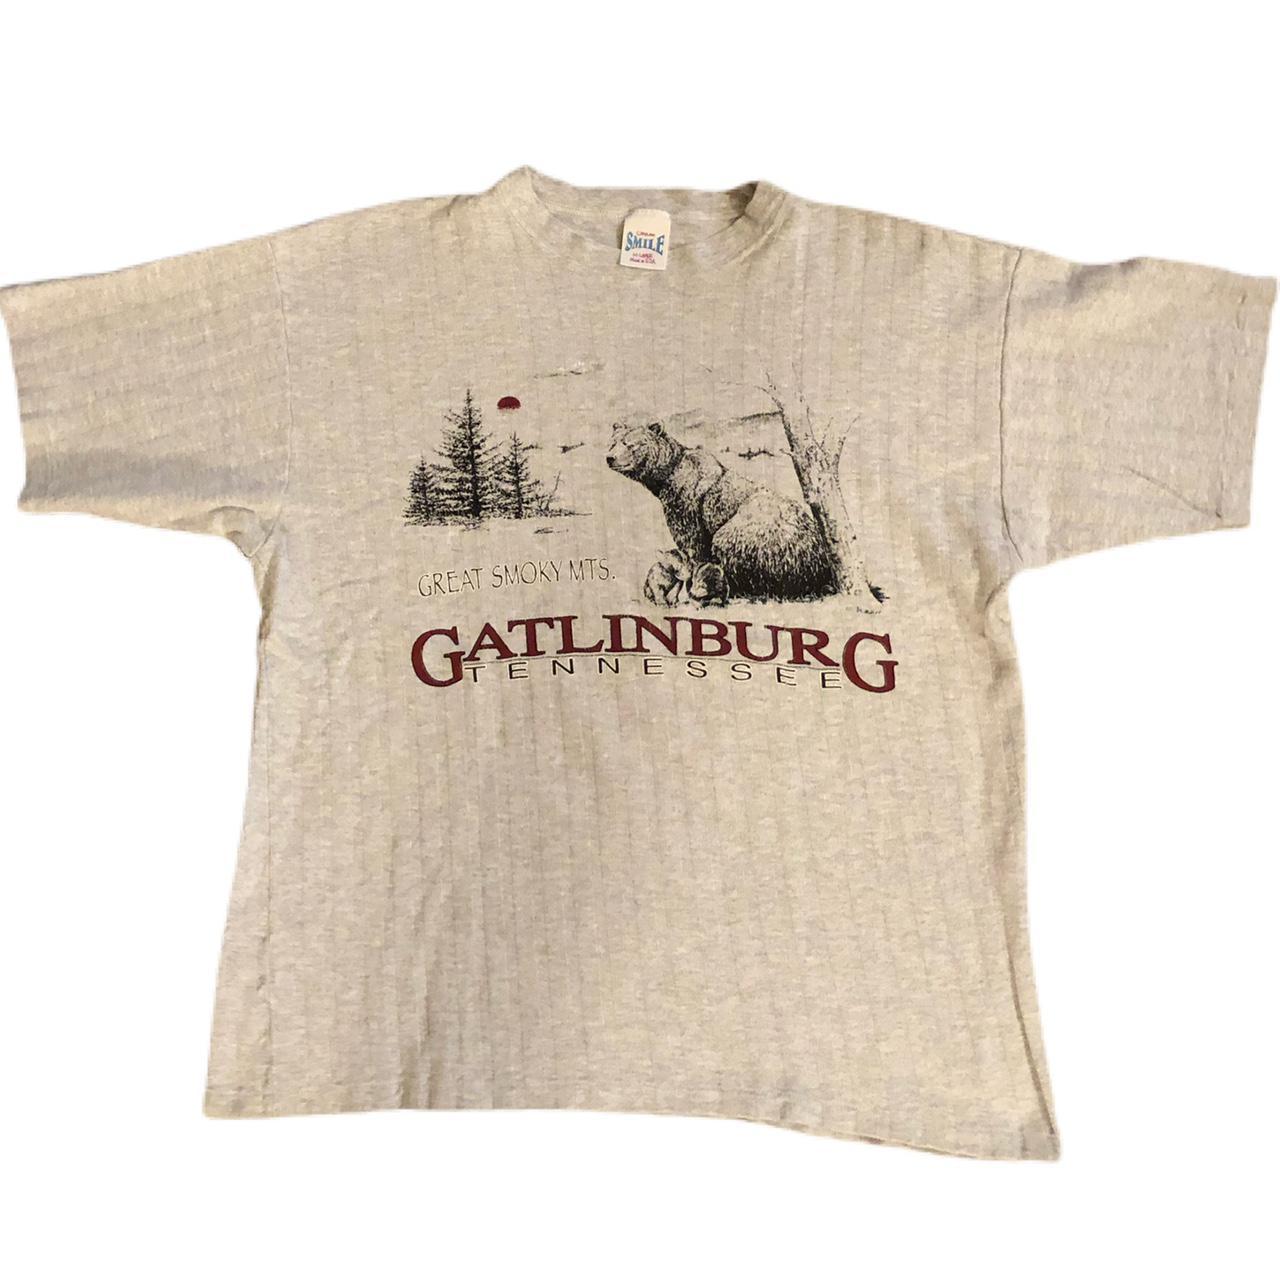 Product Image 1 - Great Smoky Mt Gatlinburg Tennessee